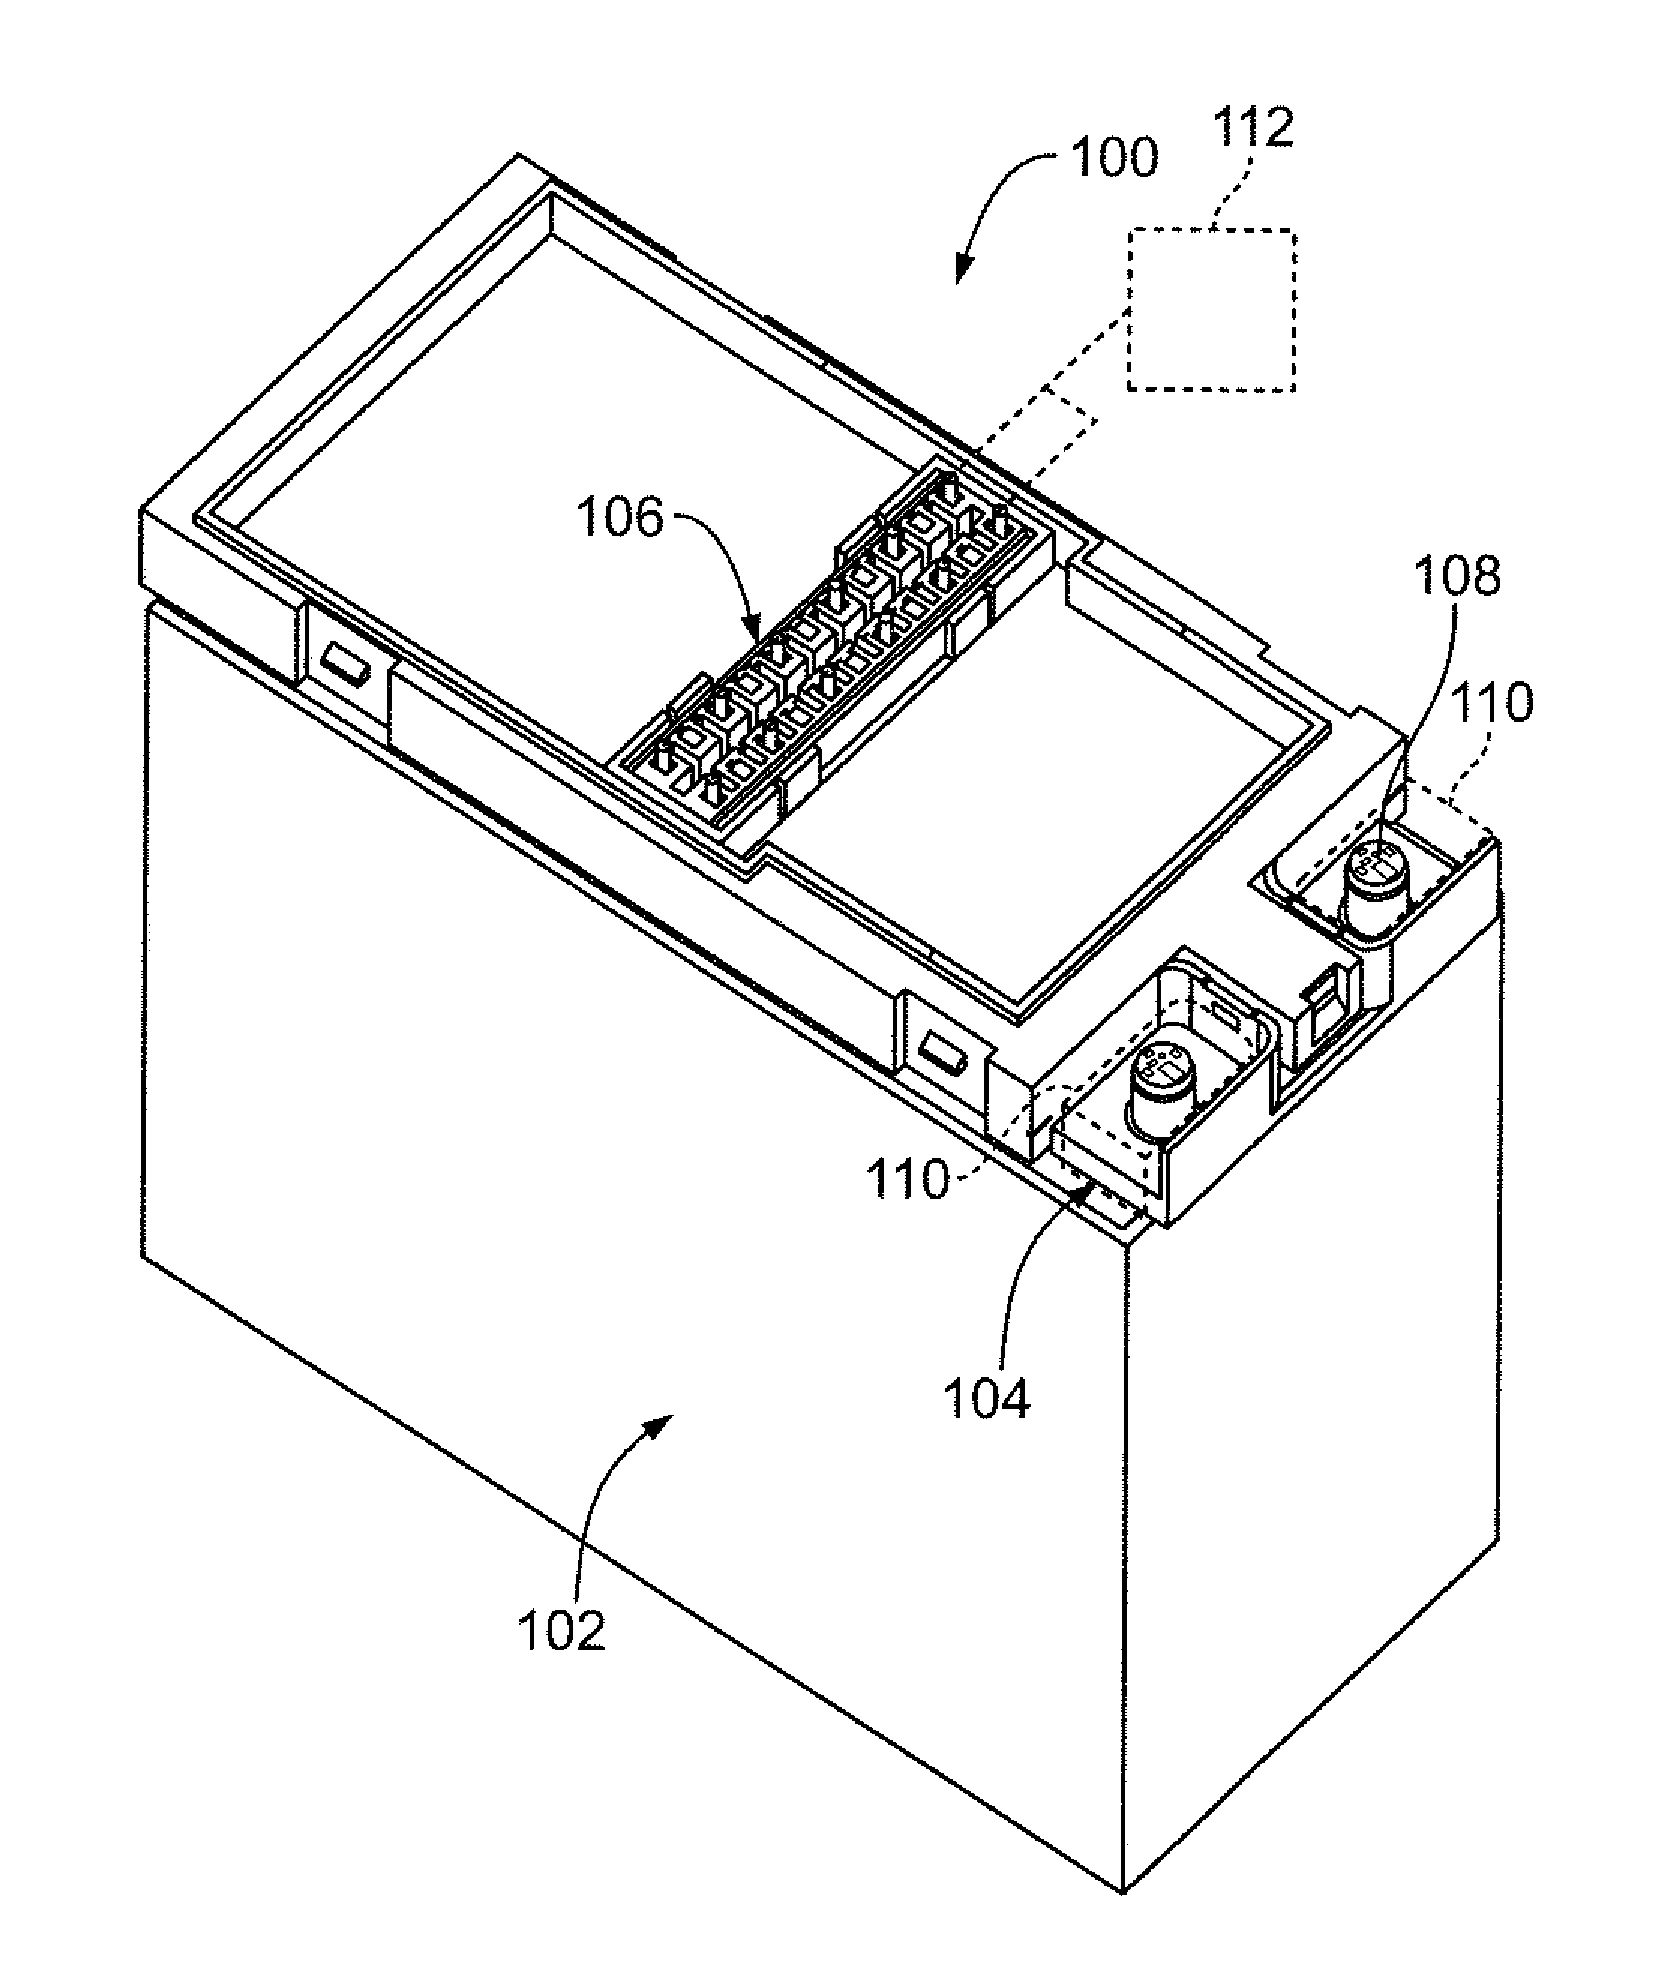 Battery connector system